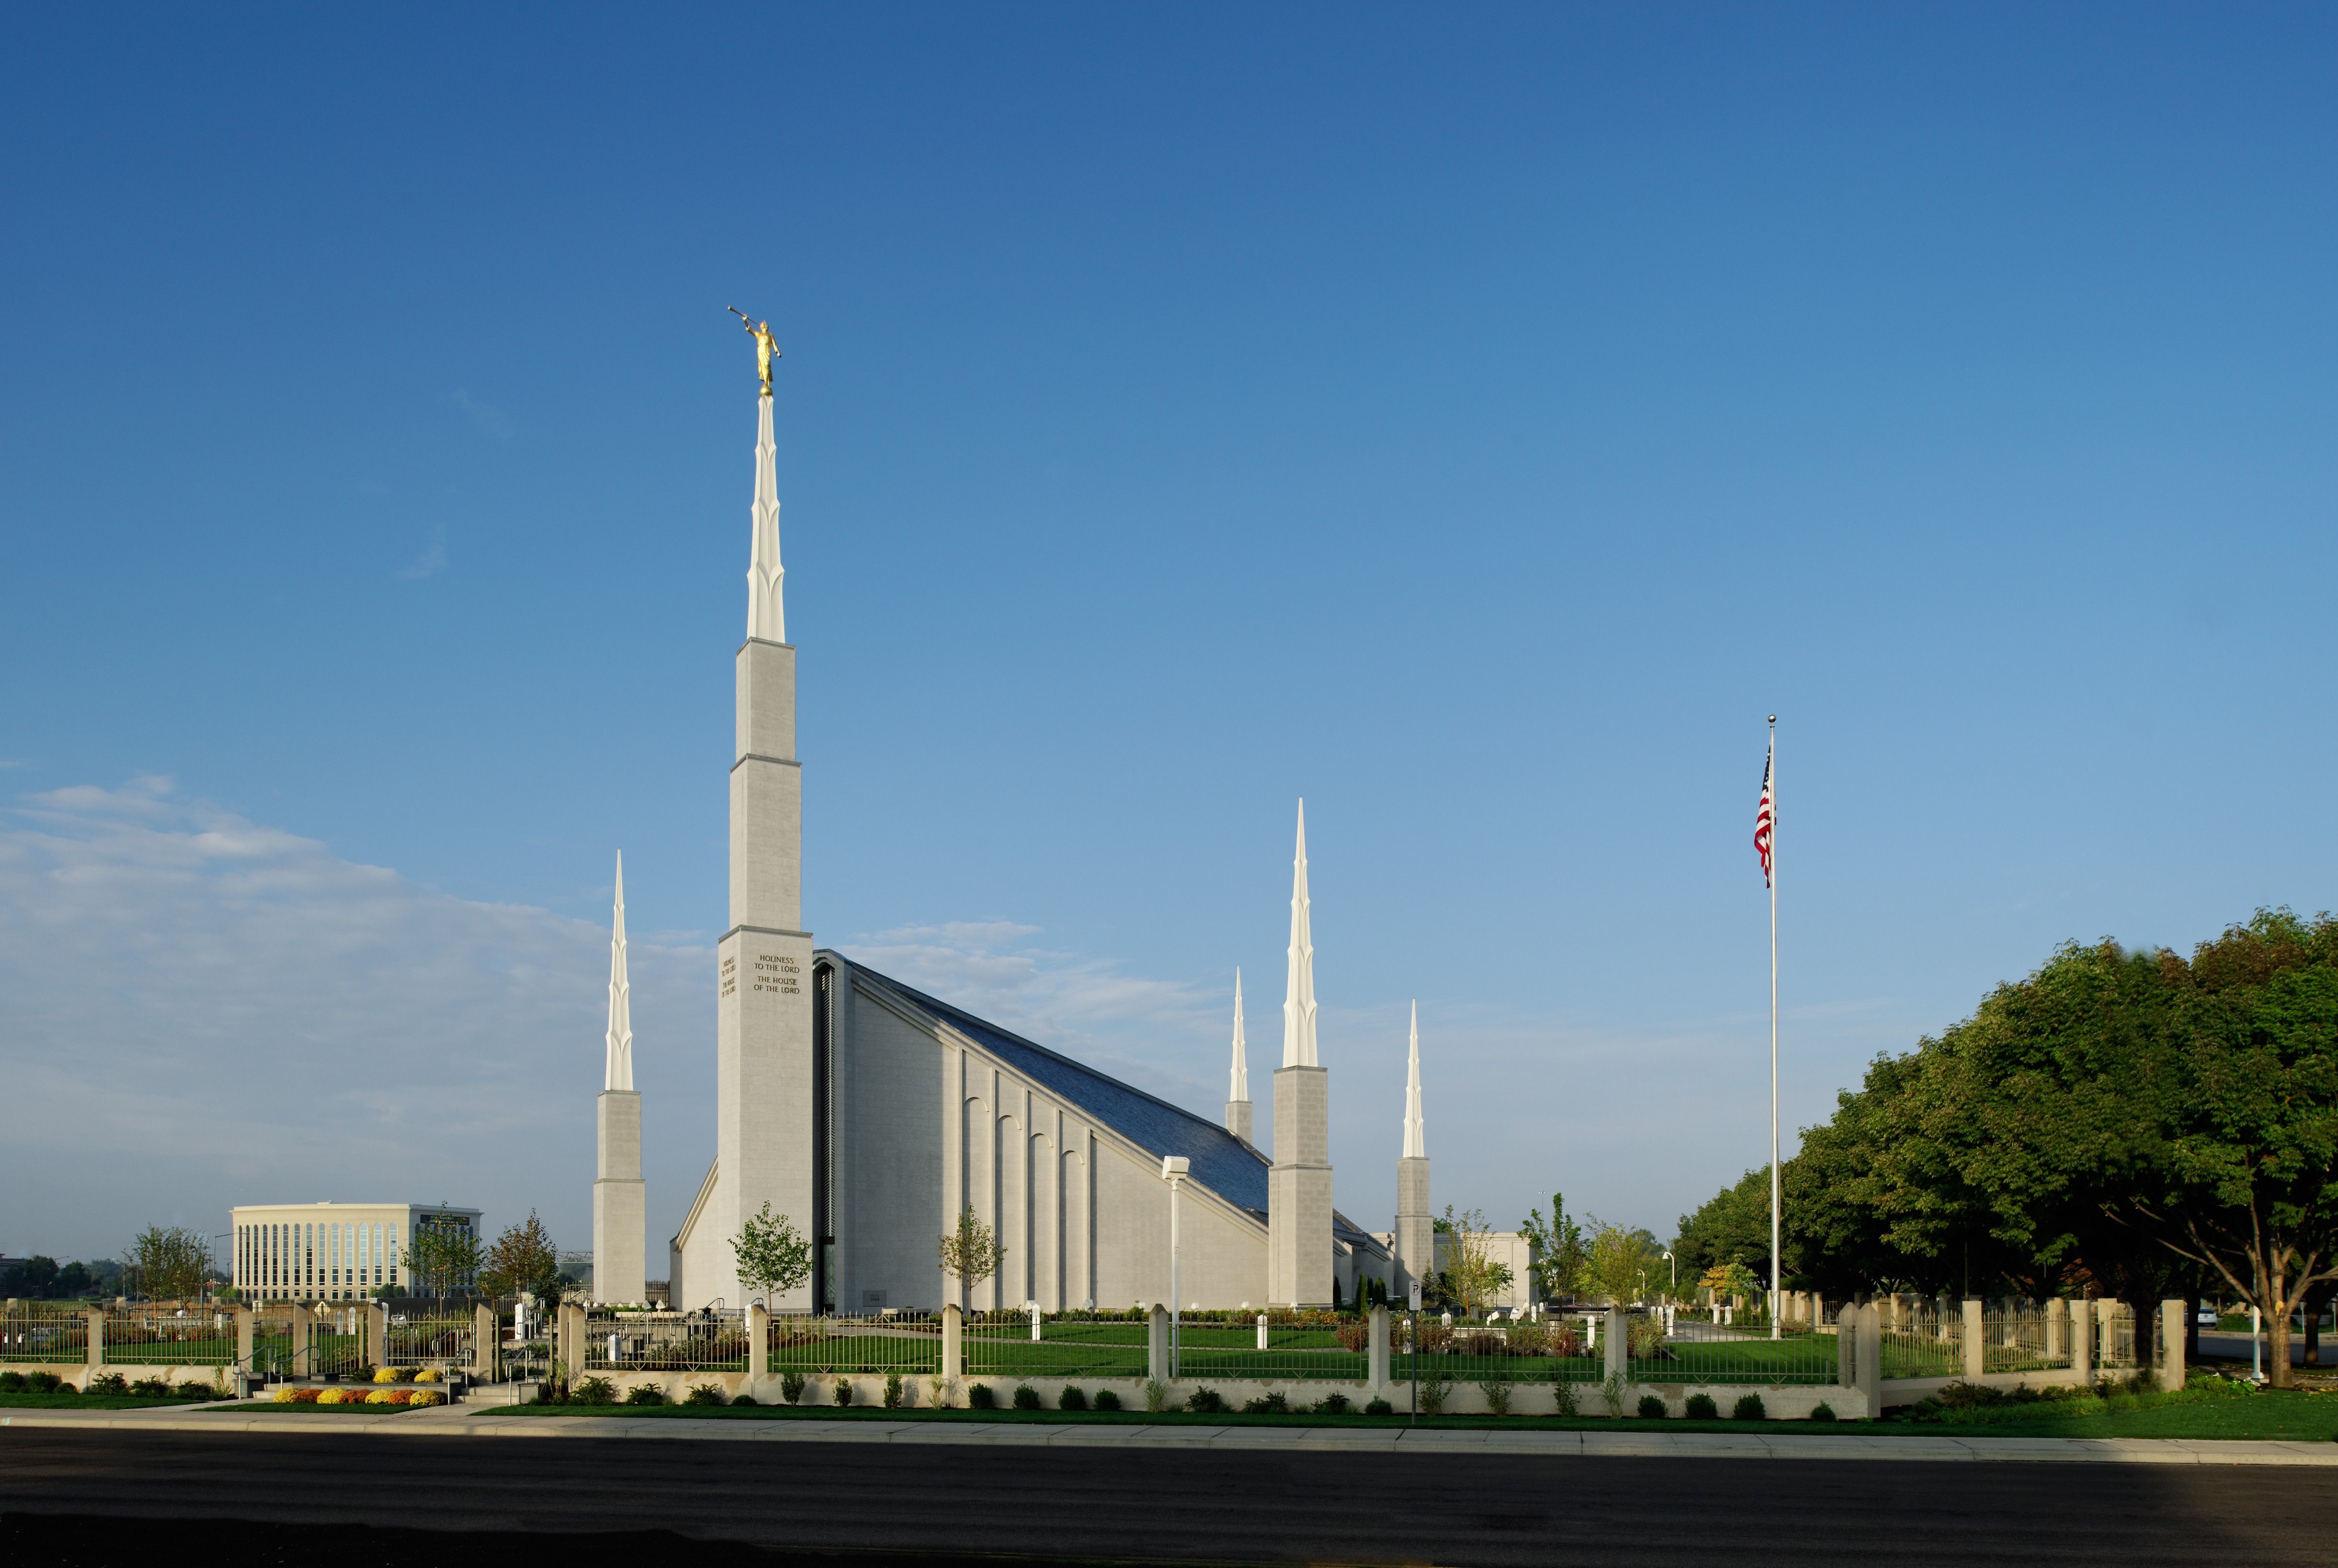 A wide view of the Boise Idaho Temple and grounds.